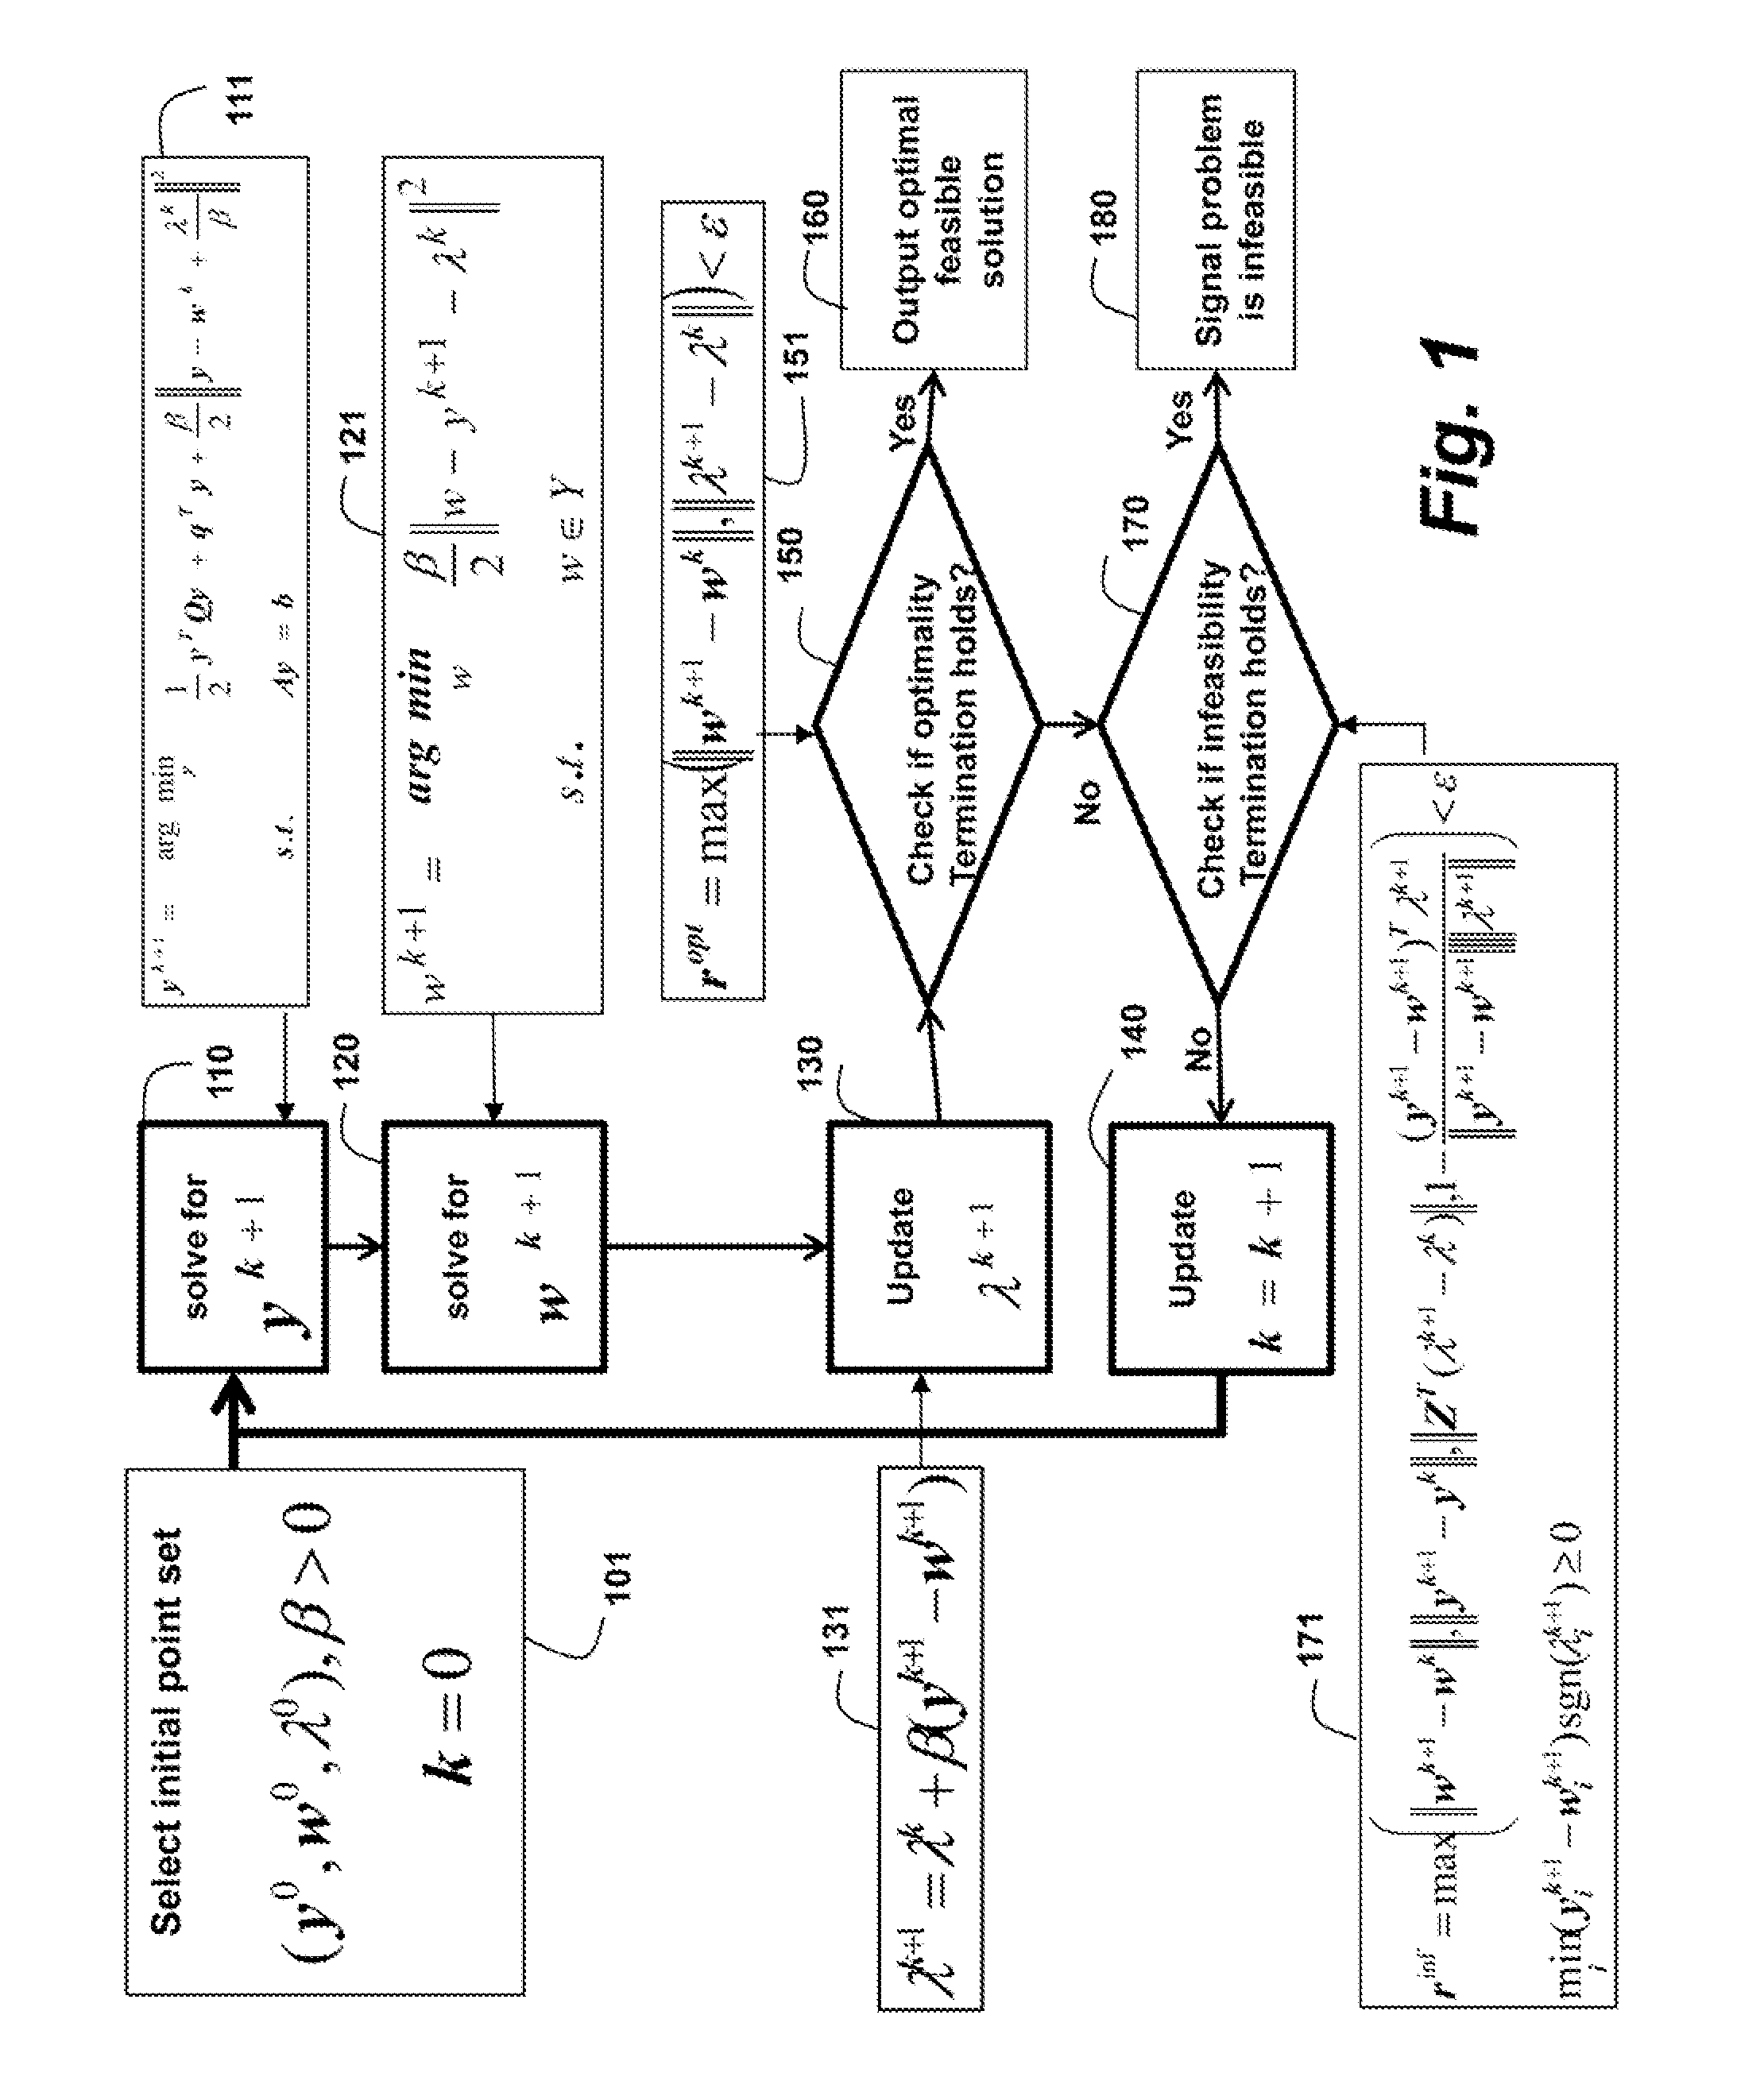 Method for Solving Quadratic Programs for Convex Sets with Linear Equalities by an Alternating Direction Method of Multipliers with Optimized Step Sizes